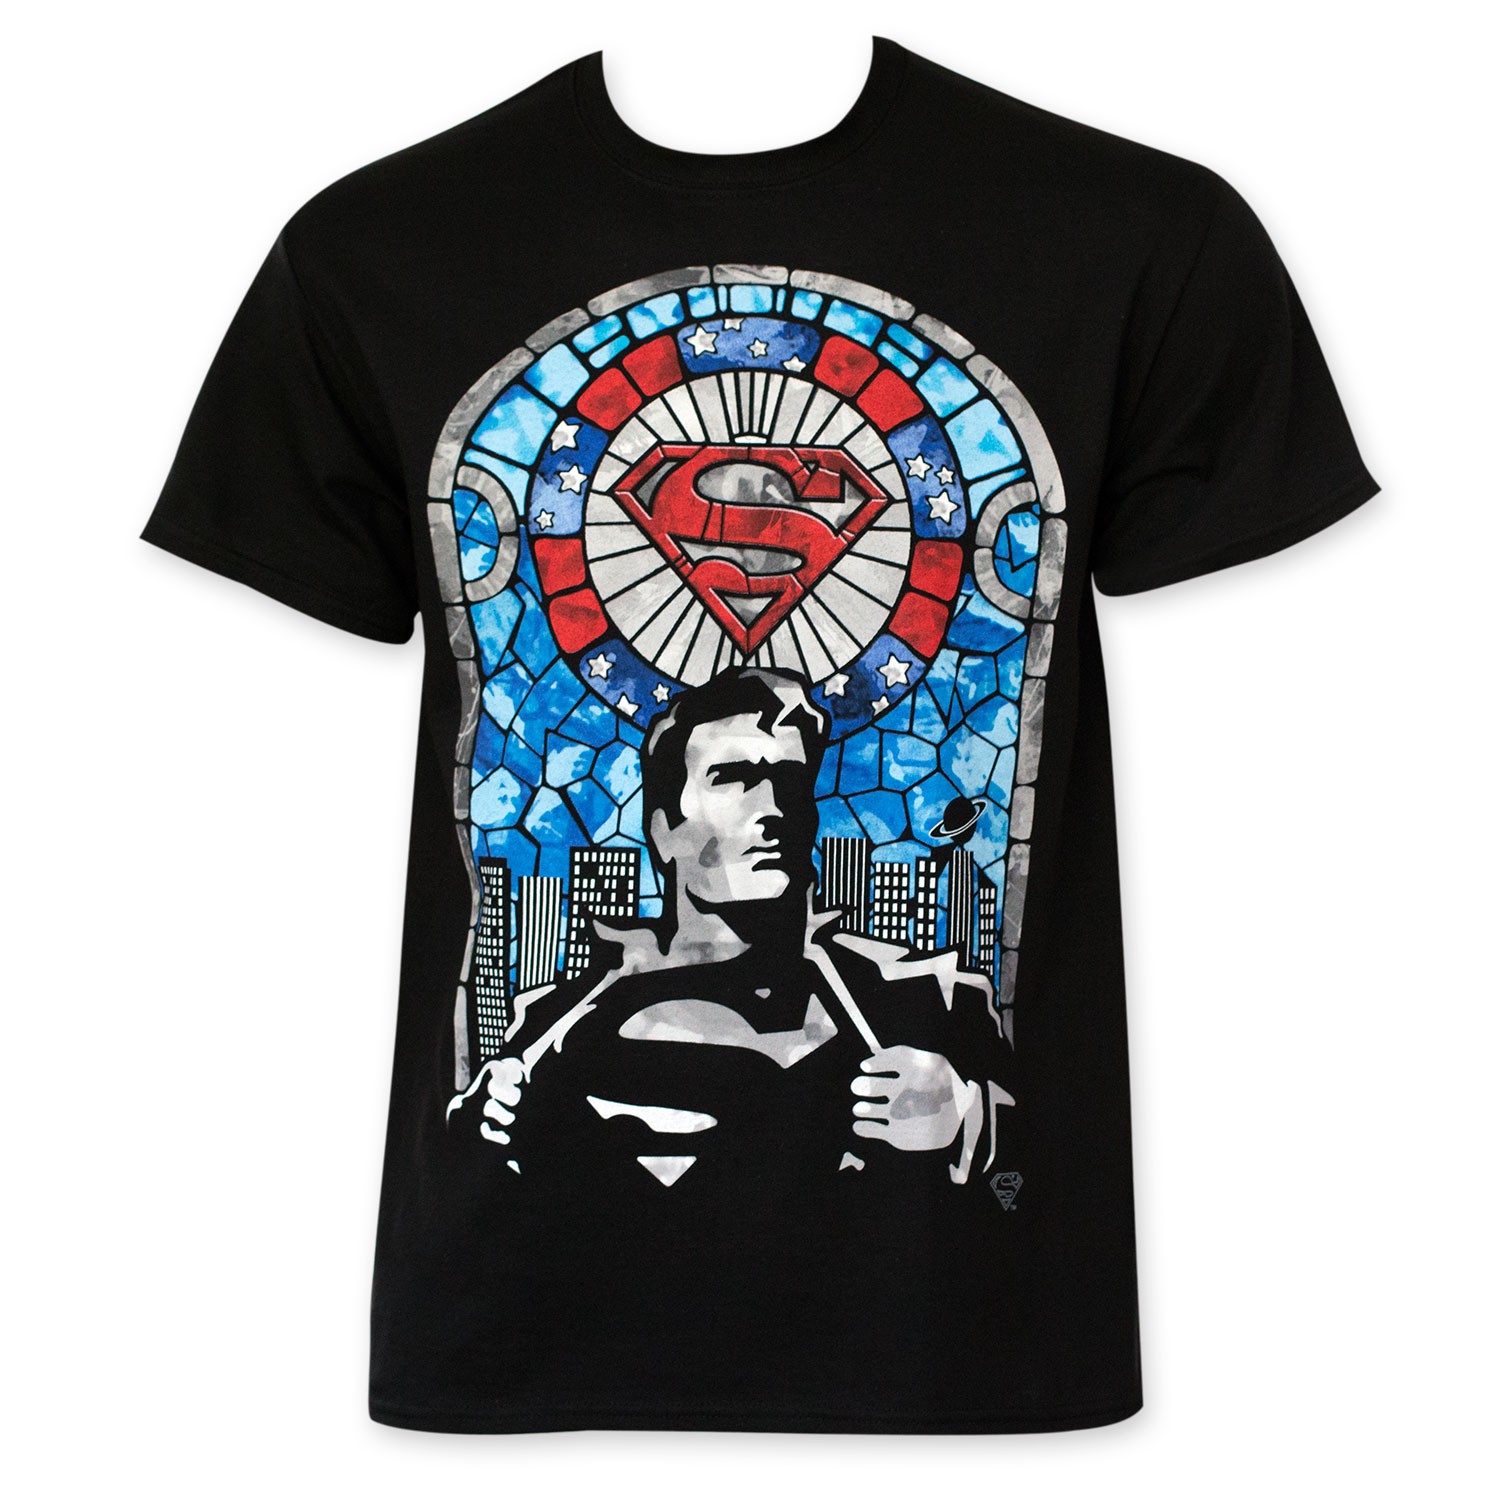 Superman Stained Glass Tee Shirt